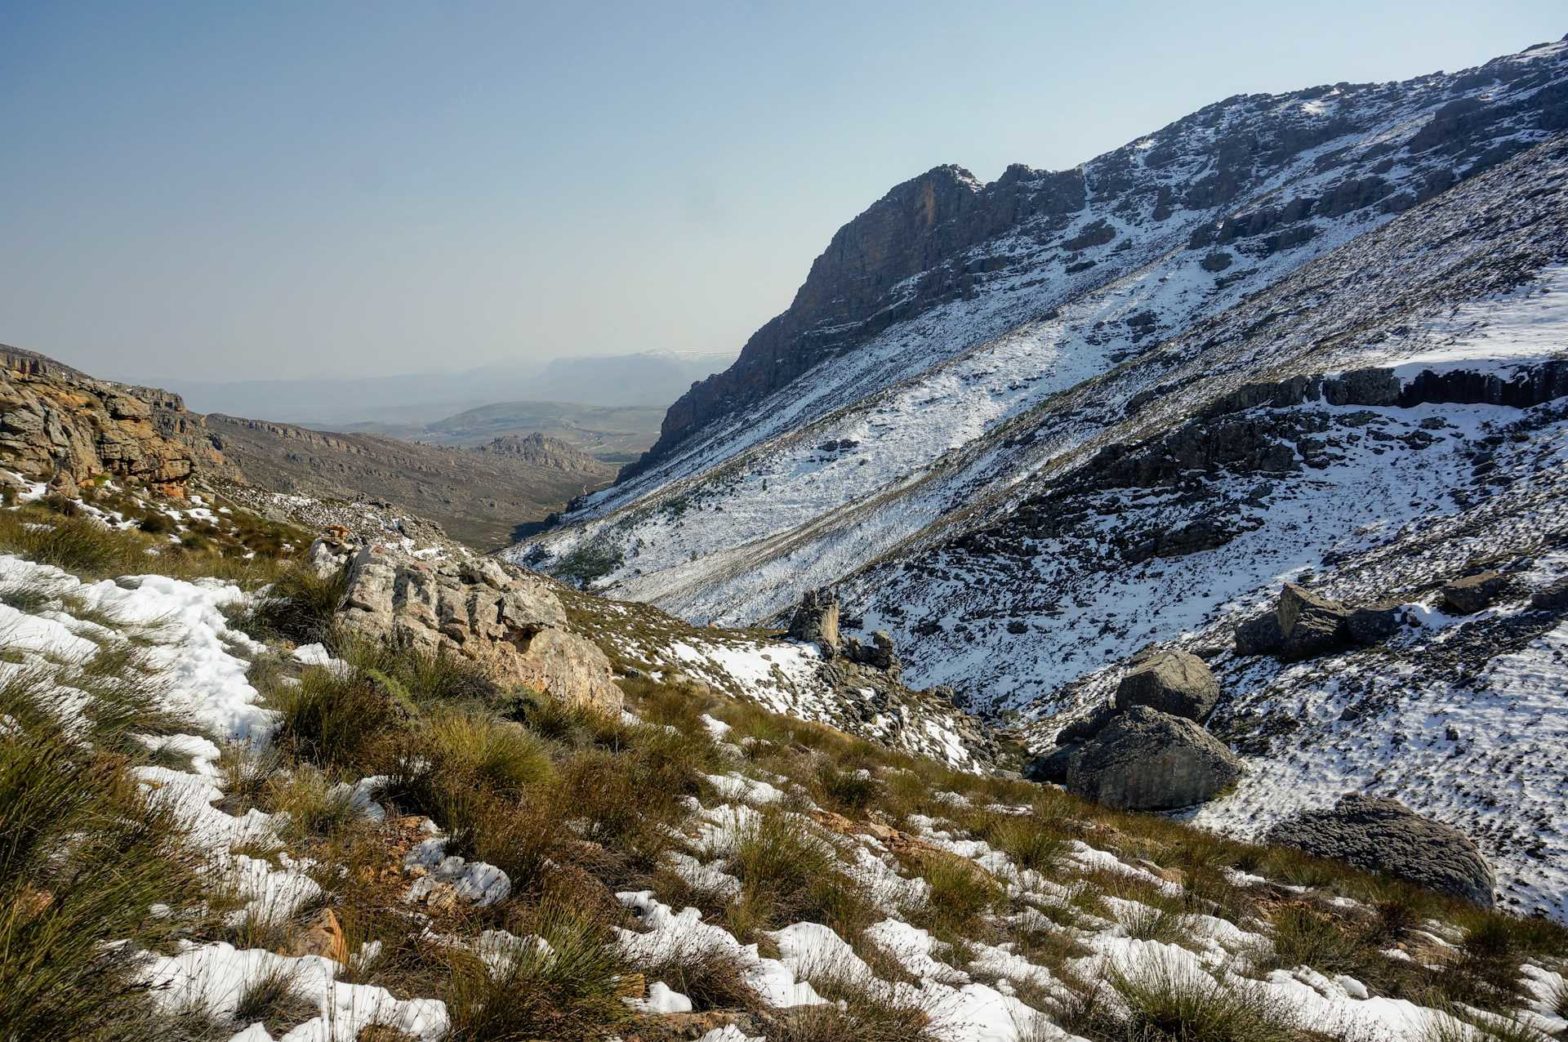 Matroosberg snow and slopes